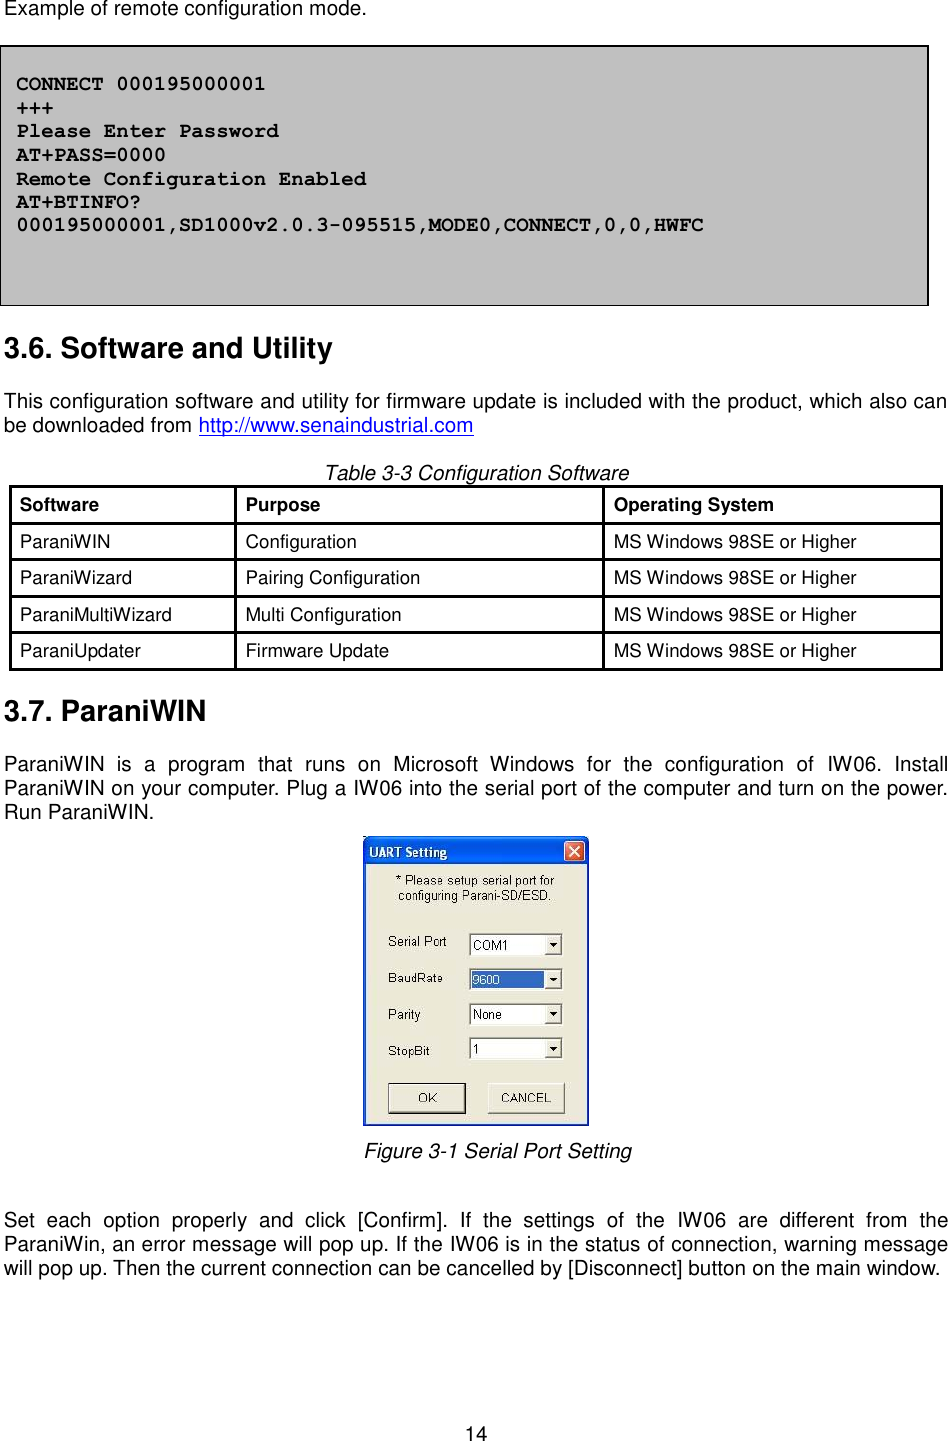   14  Example of remote configuration mode.              3.6. Software and Utility  This configuration software and utility for firmware update is included with the product, which also can be downloaded from http://www.senaindustrial.com  Table 3-3 Configuration Software Software Purpose Operating System ParaniWIN   Configuration MS Windows 98SE or Higher   ParaniWizard Pairing Configuration MS Windows 98SE or Higher ParaniMultiWizard Multi Configuration MS Windows 98SE or Higher   ParaniUpdater   Firmware Update MS Windows 98SE or Higher    3.7. ParaniWIN  ParaniWIN  is  a  program  that  runs  on  Microsoft  Windows  for  the  configuration  of  IW06.  Install ParaniWIN on your computer. Plug a IW06 into the serial port of the computer and turn on the power. Run ParaniWIN.      Figure 3-1 Serial Port Setting  Set  each  option  properly  and  click  [Confirm].  If  the  settings  of  the  IW06  are  different  from  the ParaniWin, an error message will pop up. If the IW06 is in the status of connection, warning message will pop up. Then the current connection can be cancelled by [Disconnect] button on the main window.   CONNECT 000195000001 +++ Please Enter Password AT+PASS=0000 Remote Configuration Enabled AT+BTINFO? 000195000001,SD1000v2.0.3-095515,MODE0,CONNECT,0,0,HWFC 